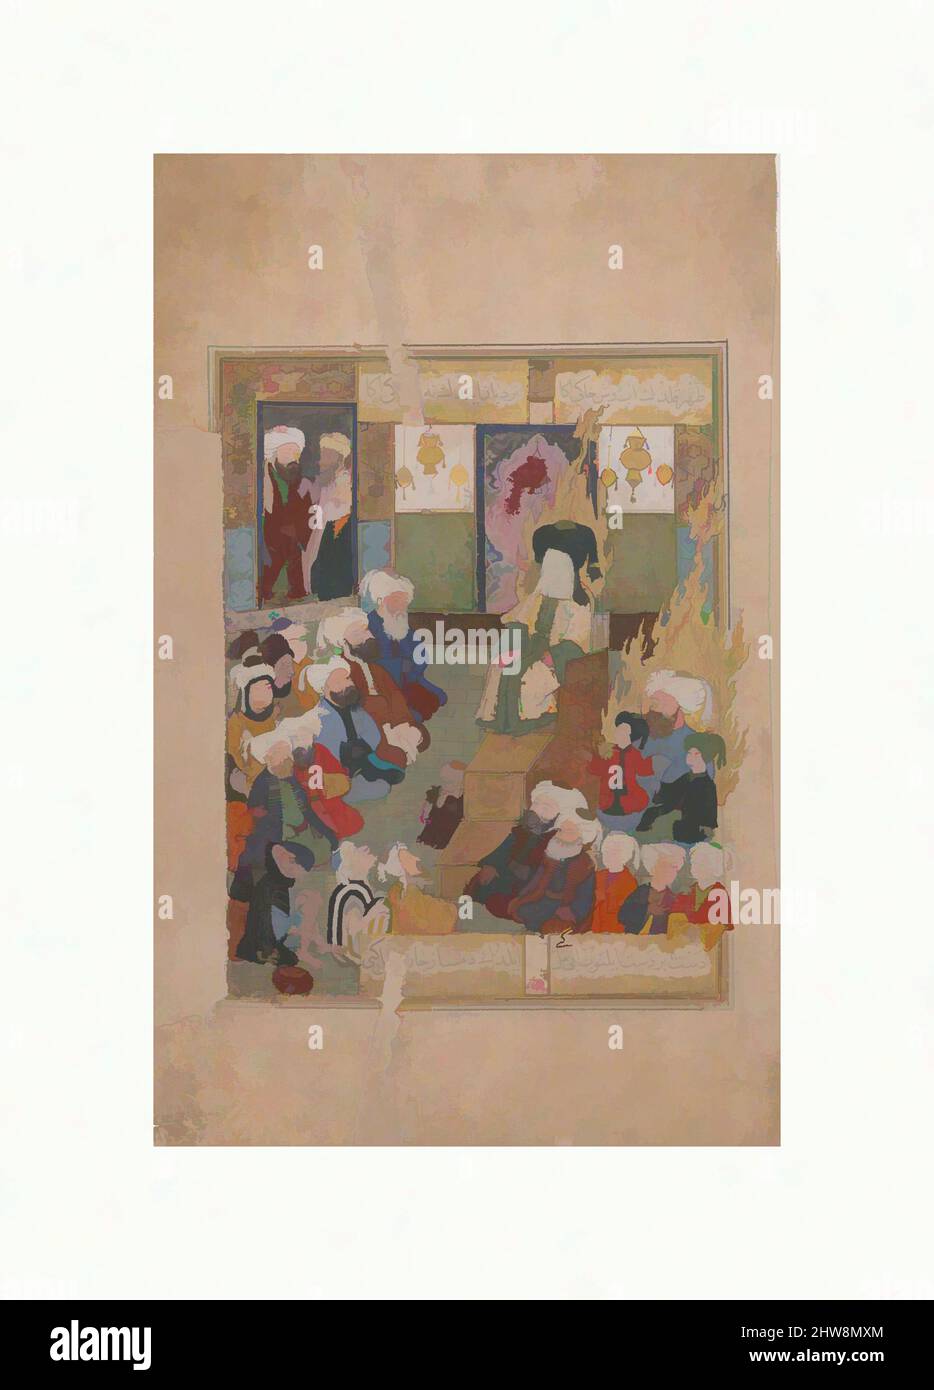 Art inspired by Prophet Muhammad Preaching', Folio from a Maqtal-i Al-i Rasul of Lami'i Chelebi, late 16th century, Attributed to Turkey or Iraq, Ink, opaque watercolor, and gold on paper, H. 7 13/16 in. (19.8 cm), Codices, The text to which this detached page once belonged, entitled ', Classic works modernized by Artotop with a splash of modernity. Shapes, color and value, eye-catching visual impact on art. Emotions through freedom of artworks in a contemporary way. A timeless message pursuing a wildly creative new direction. Artists turning to the digital medium and creating the Artotop NFT Stock Photo